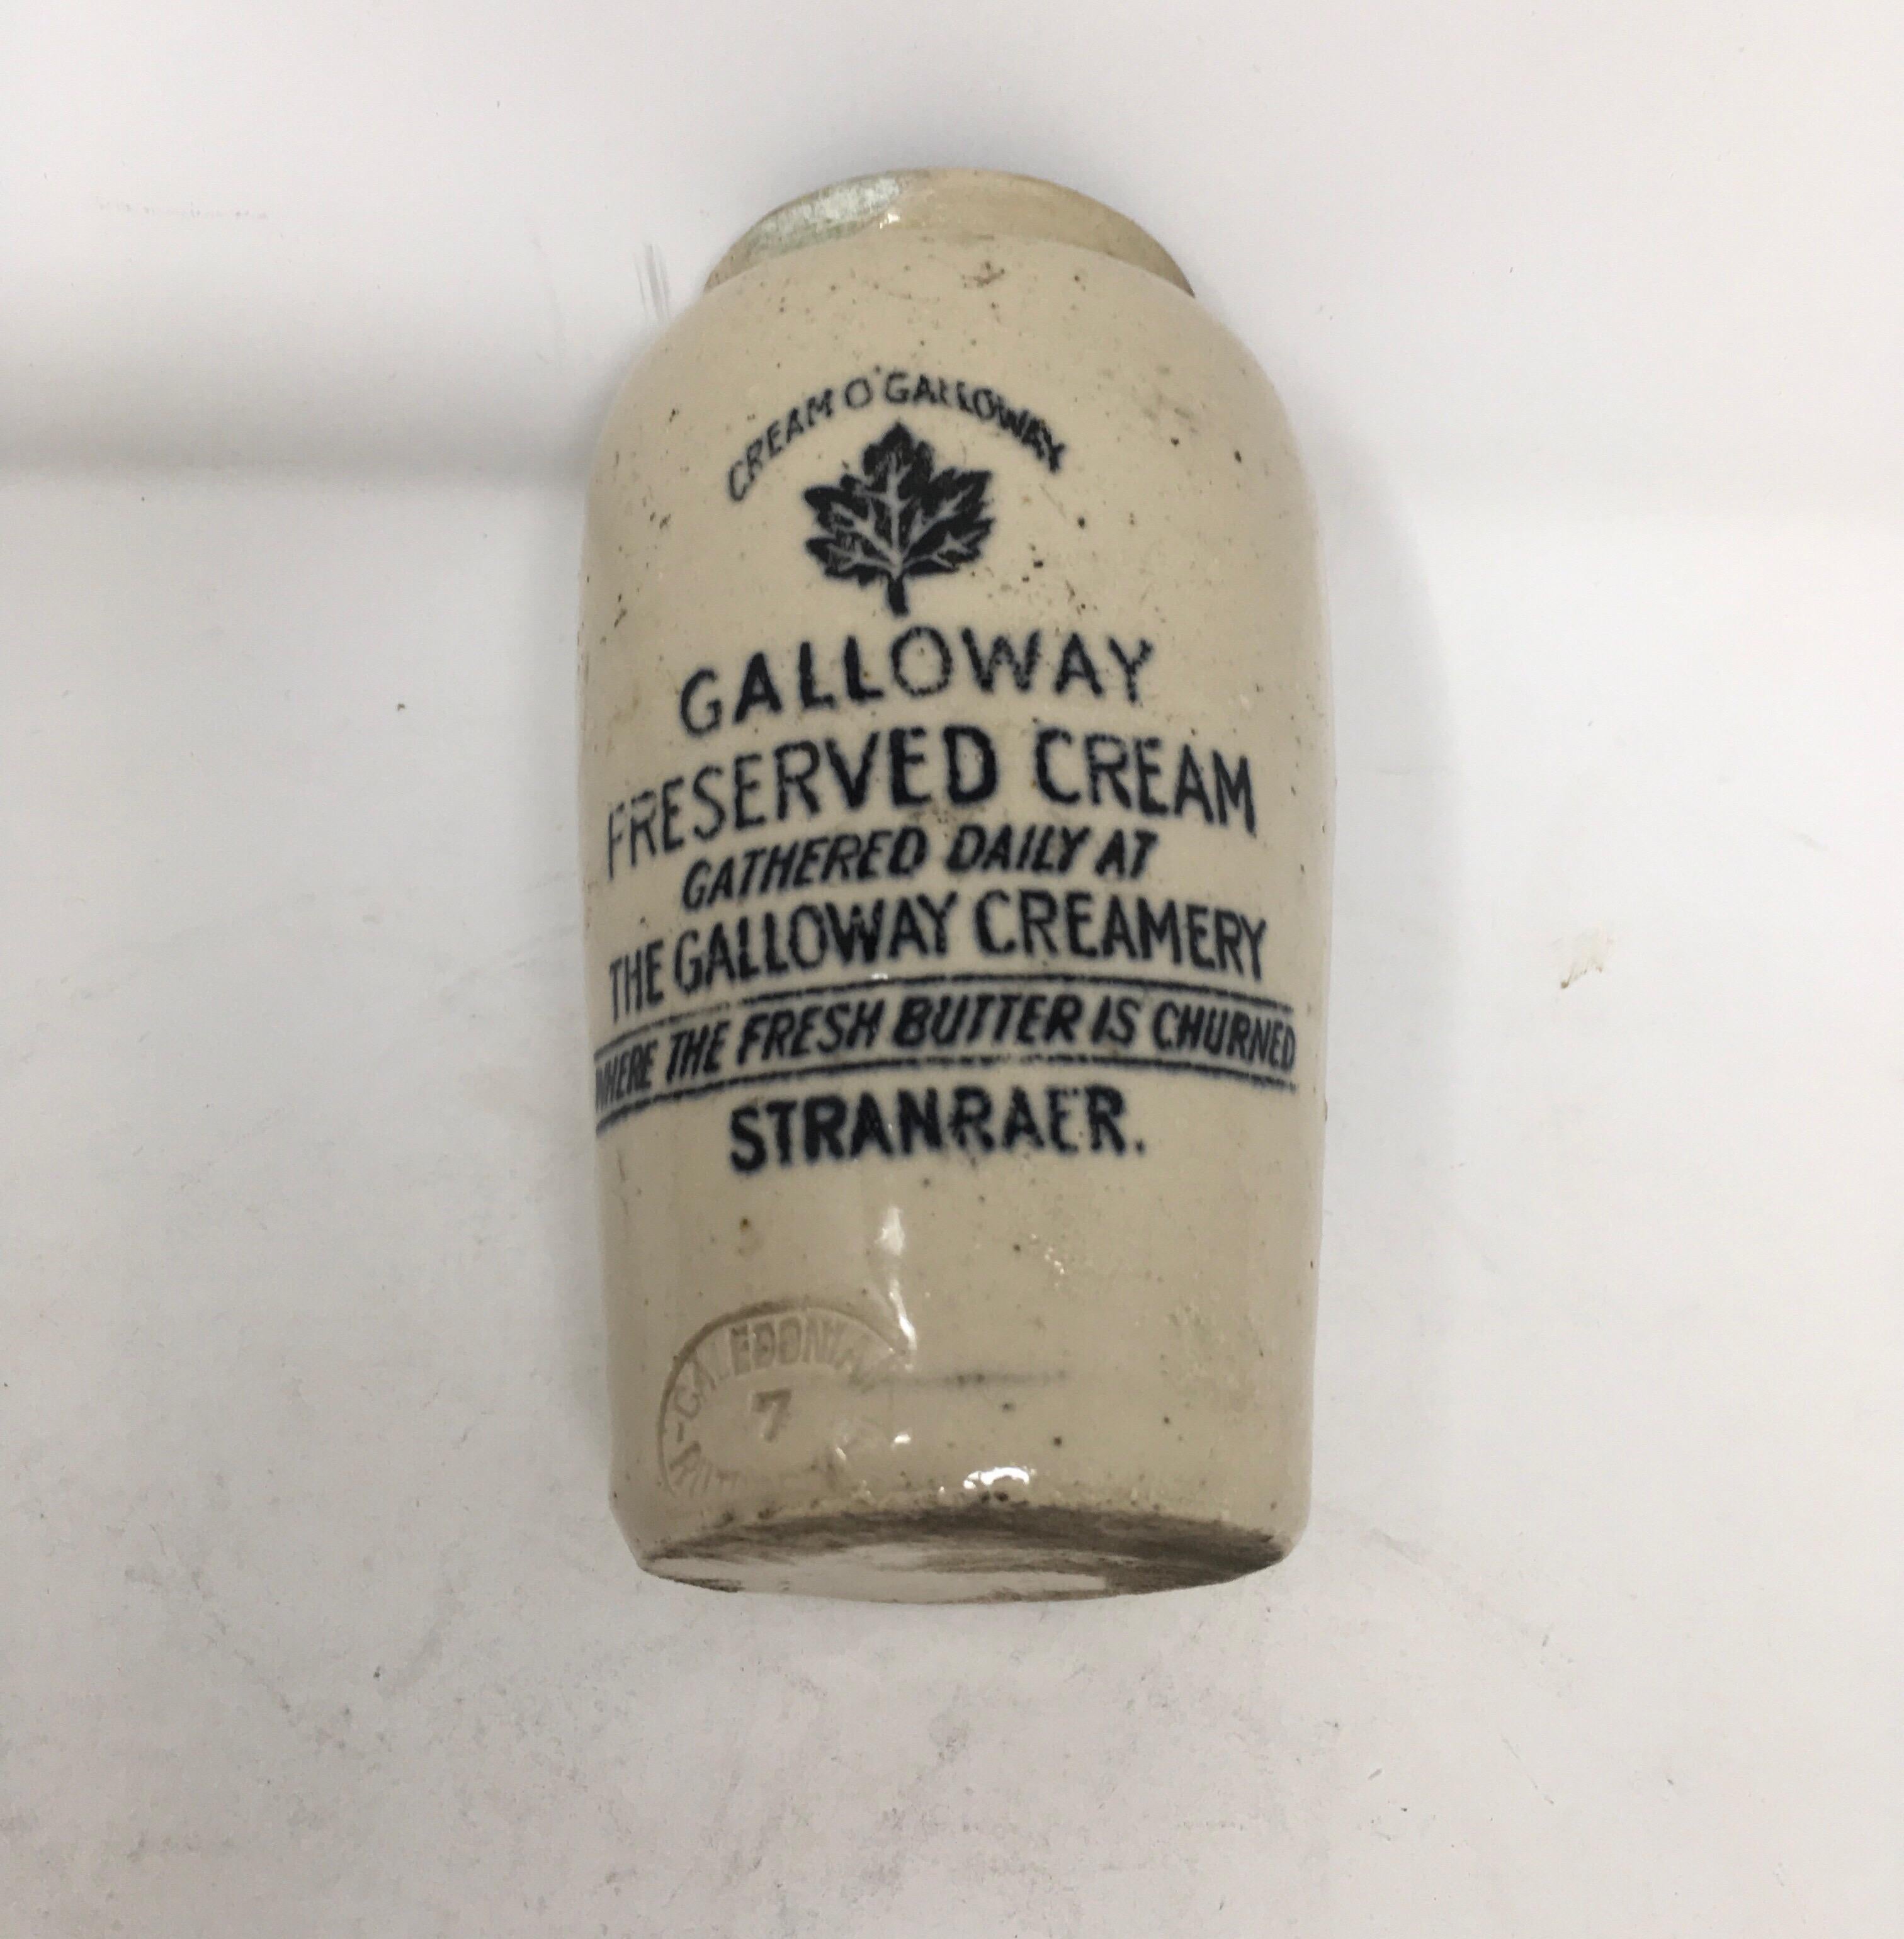 Found in England, this vintage Galloway preserved cream ironstone advertising jar from Scotland is in good clean condition. The decorative pot has transfer on the front in black lettering under the glaze and has the company's logo, Cream O'Galloway